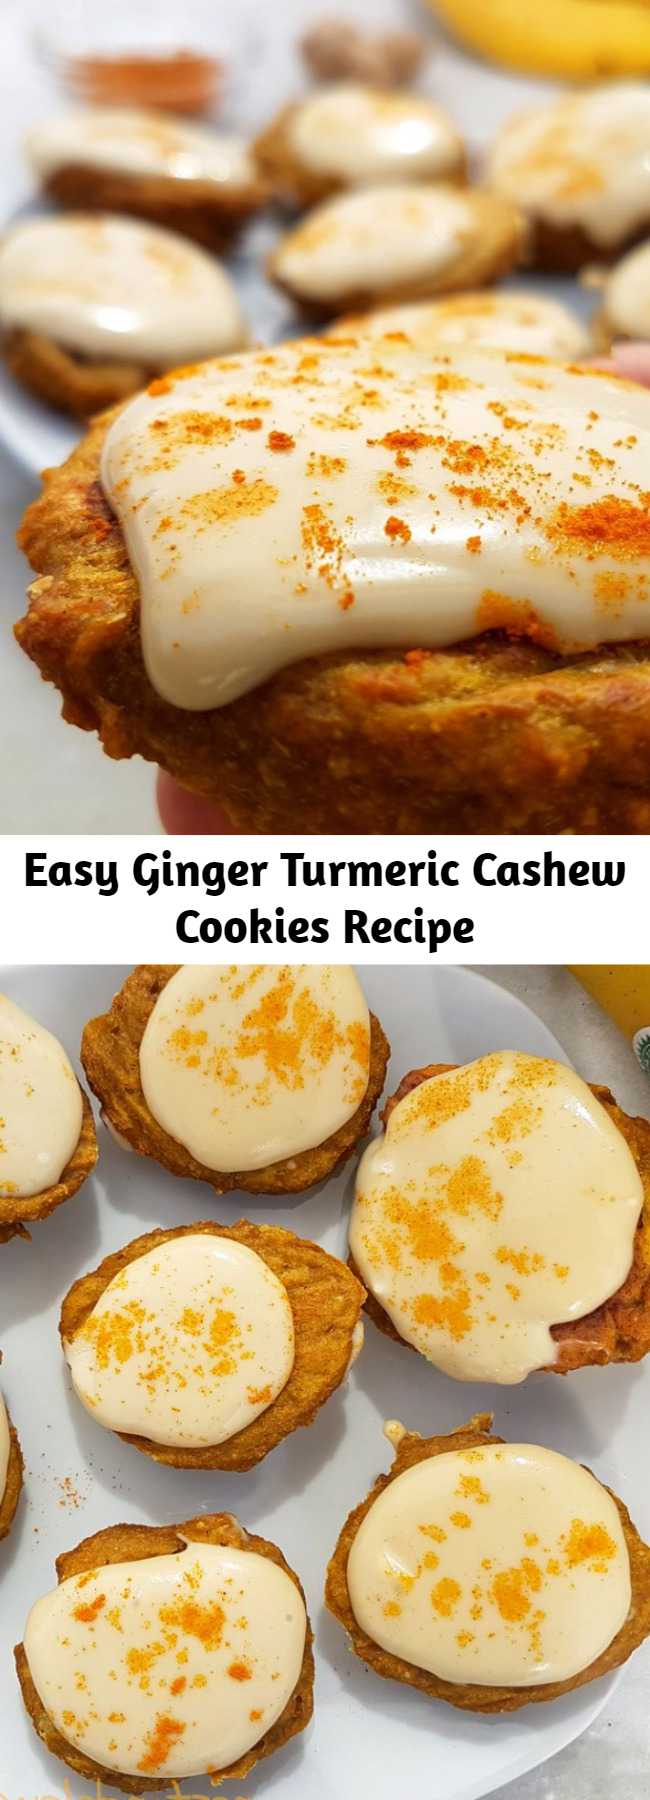 Easy Ginger Turmeric Cashew Cookies Recipe - Quick and easy healthy cookies recipe. These golden cookies are ginger and turmeric flavour with a creamy cashew frosting. Vegan and gluten free when made with gluten-free oats. #vegan #veganrecipe #healthy #cookies #healthycookies